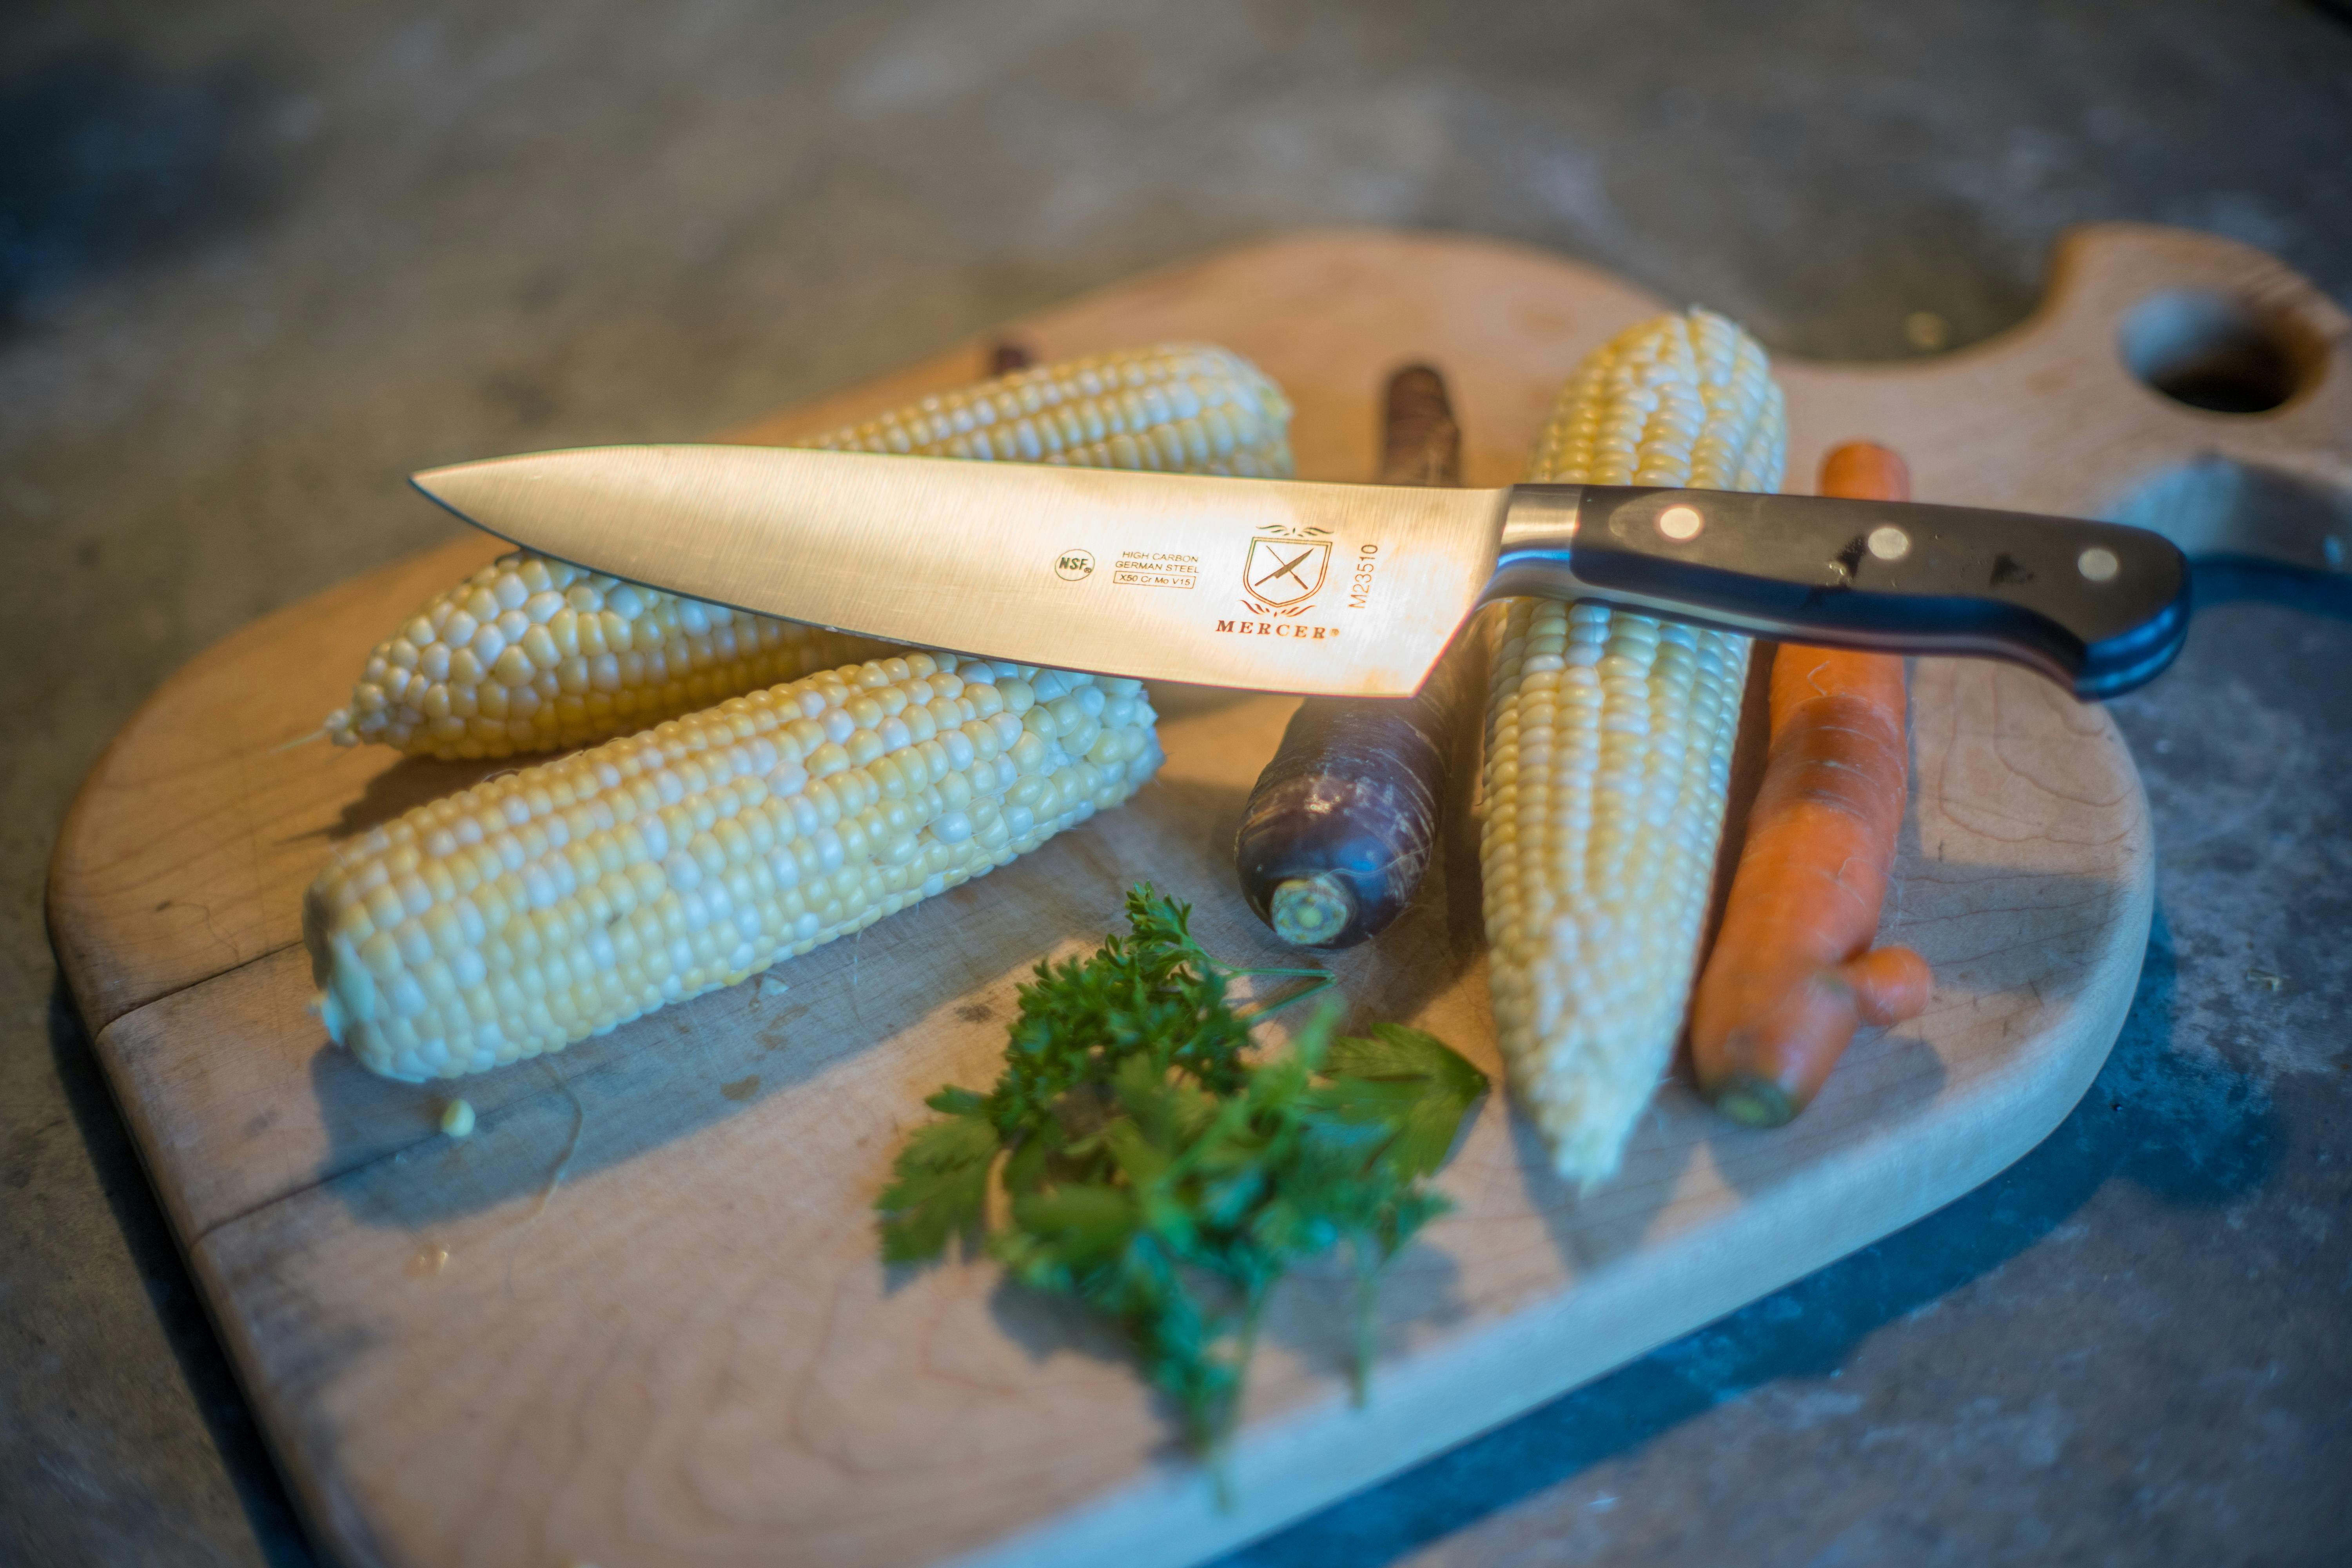 Expert Review: Mercer Culinary Renaissance Forged Chef's Knife, 8 Inch